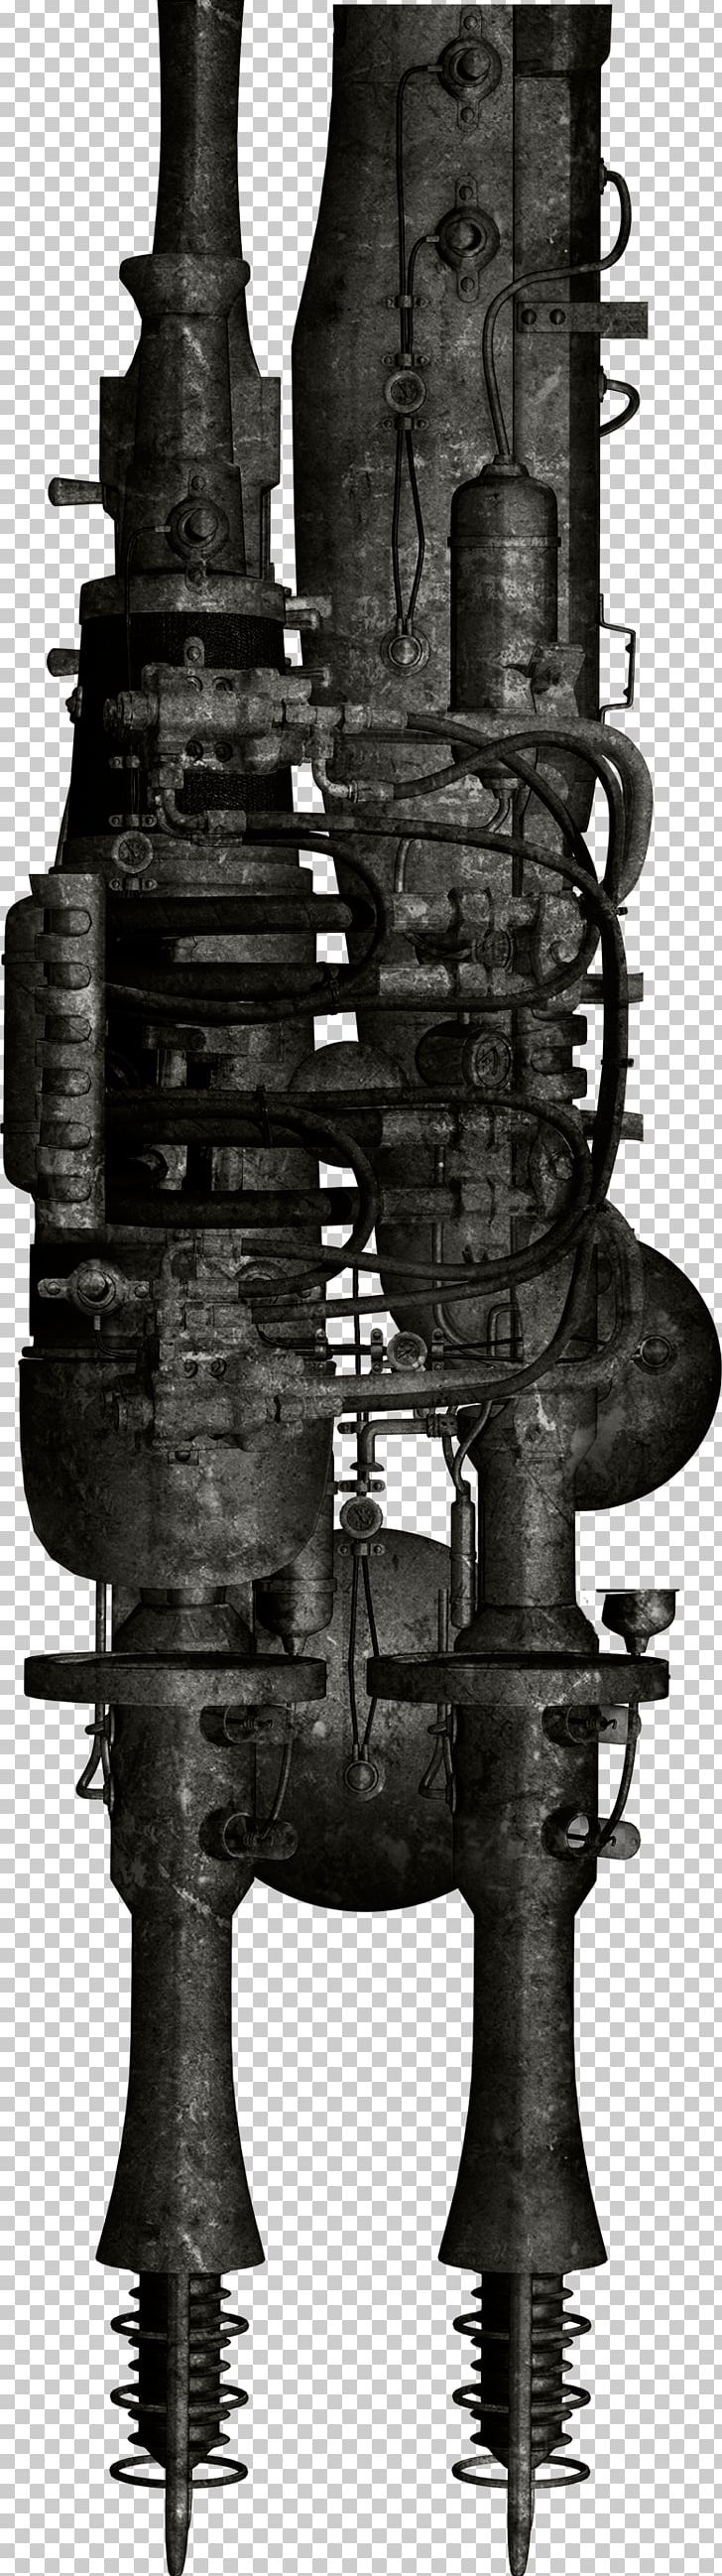 Industrial Revolution Steam Engine Steampunk Machine Industry PNG, Clipart, Black And White, Dark, Engine, Engineer, Engineering Free PNG Download